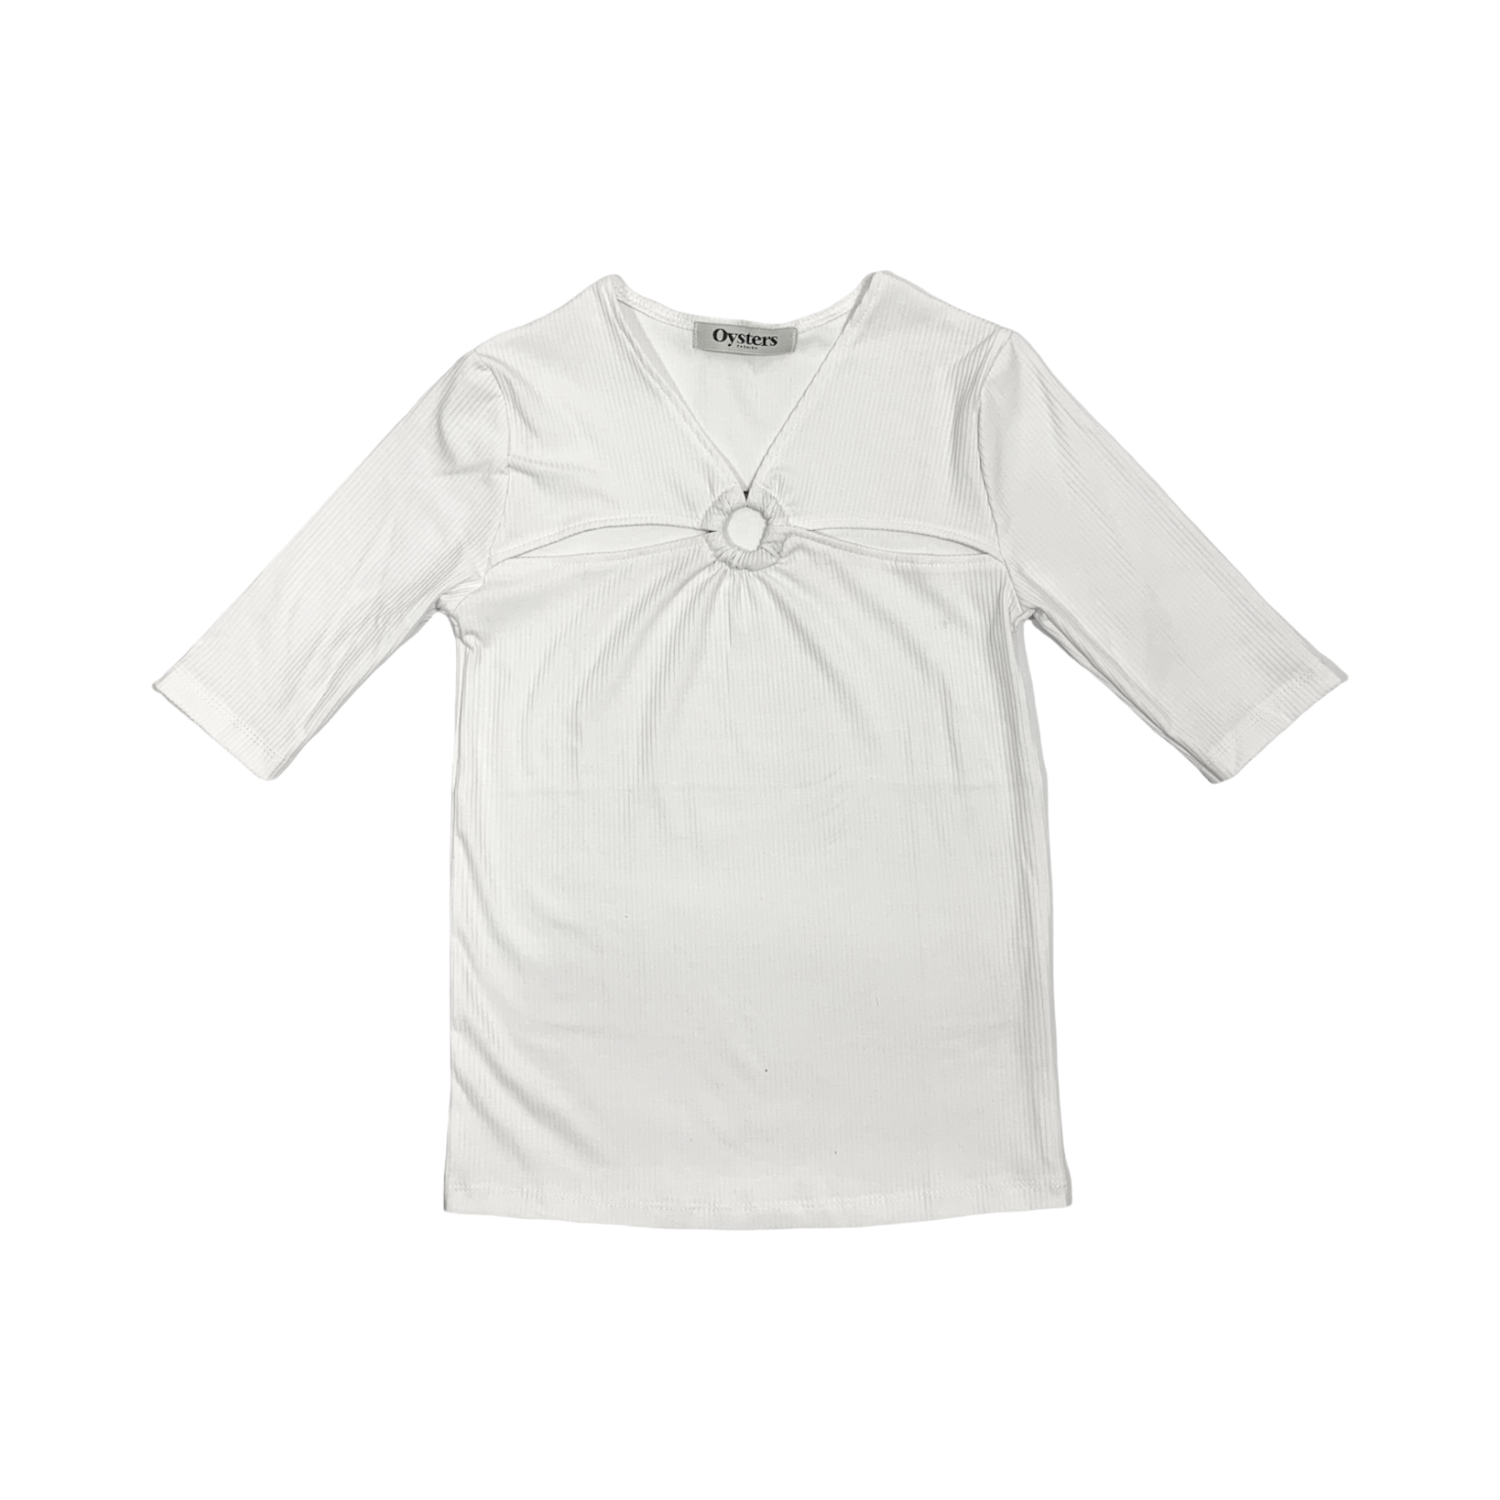 The Ring & Cutout details Top (White)